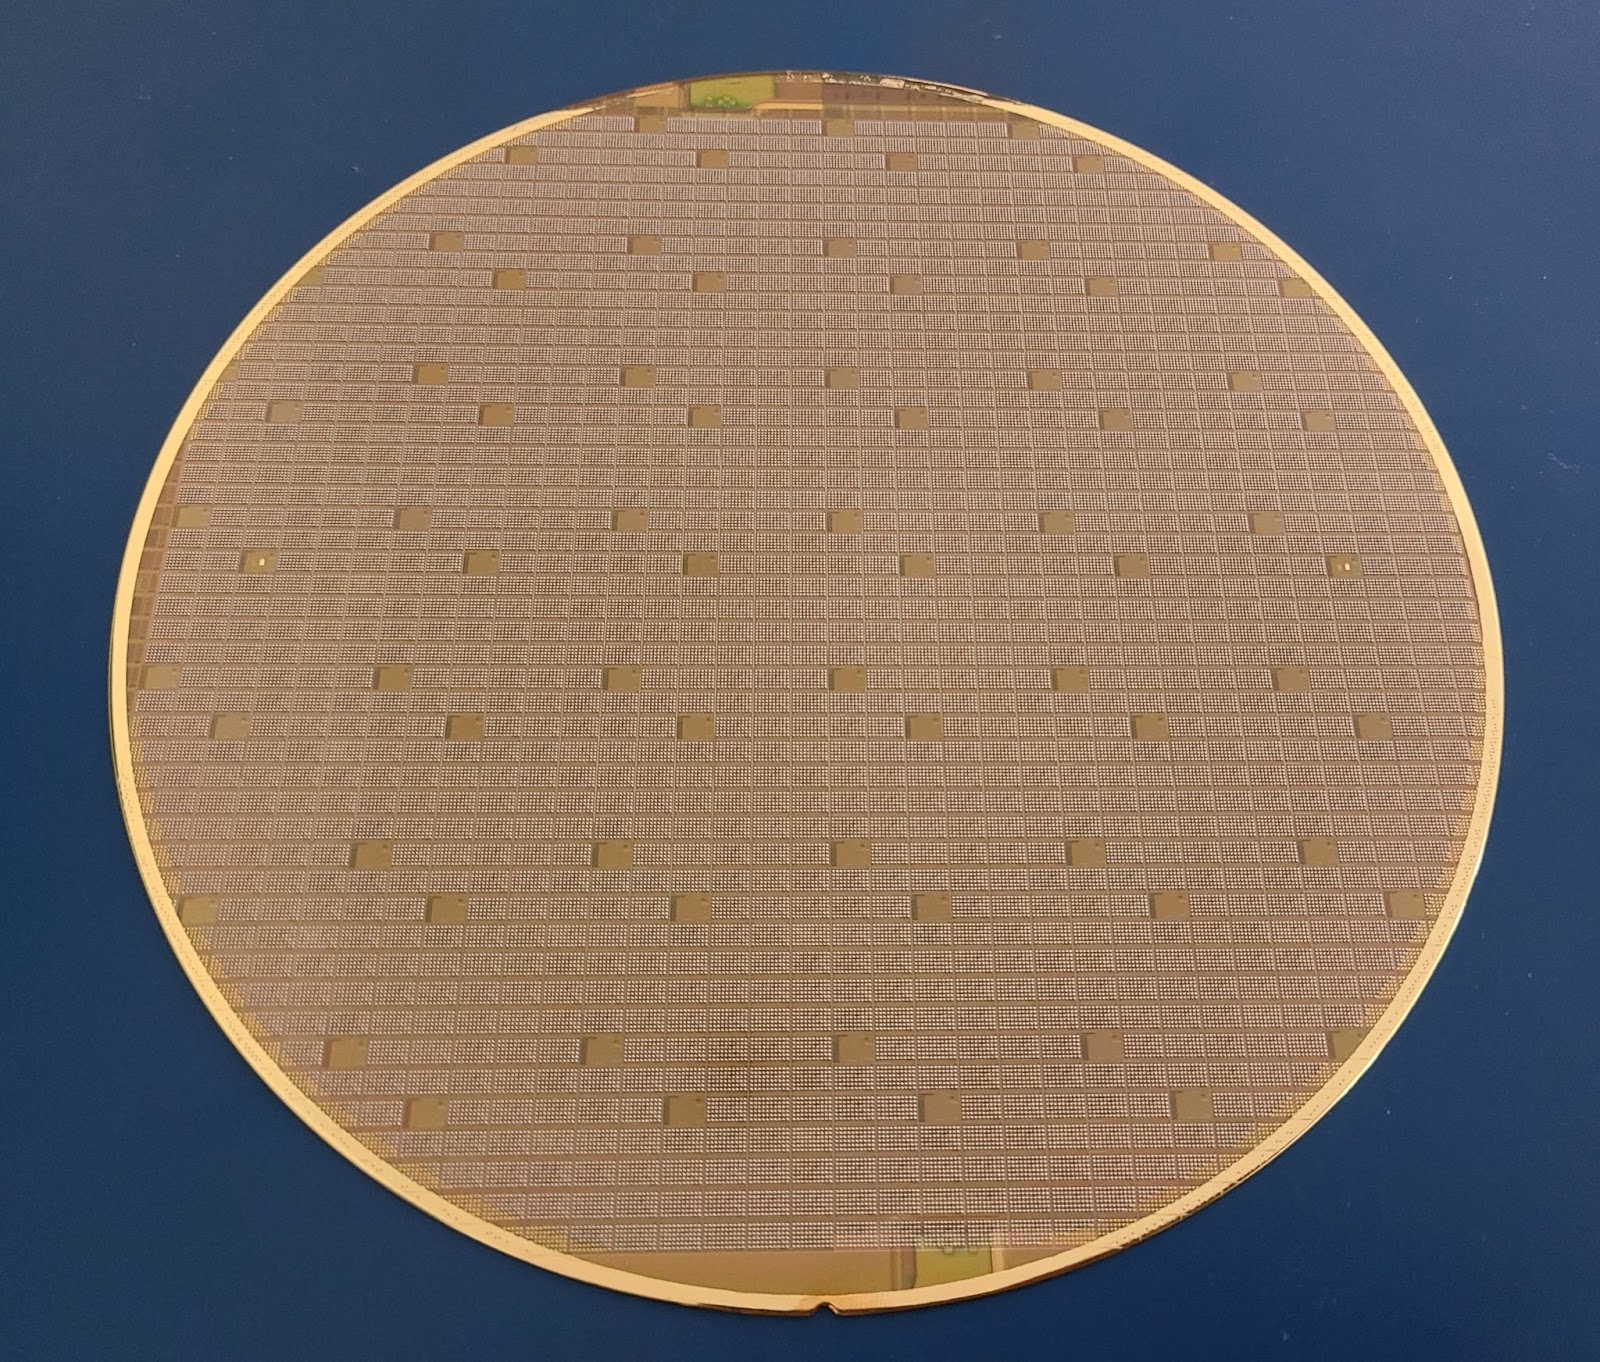 Picture of a full wafer using the SKY130 open source PDK.